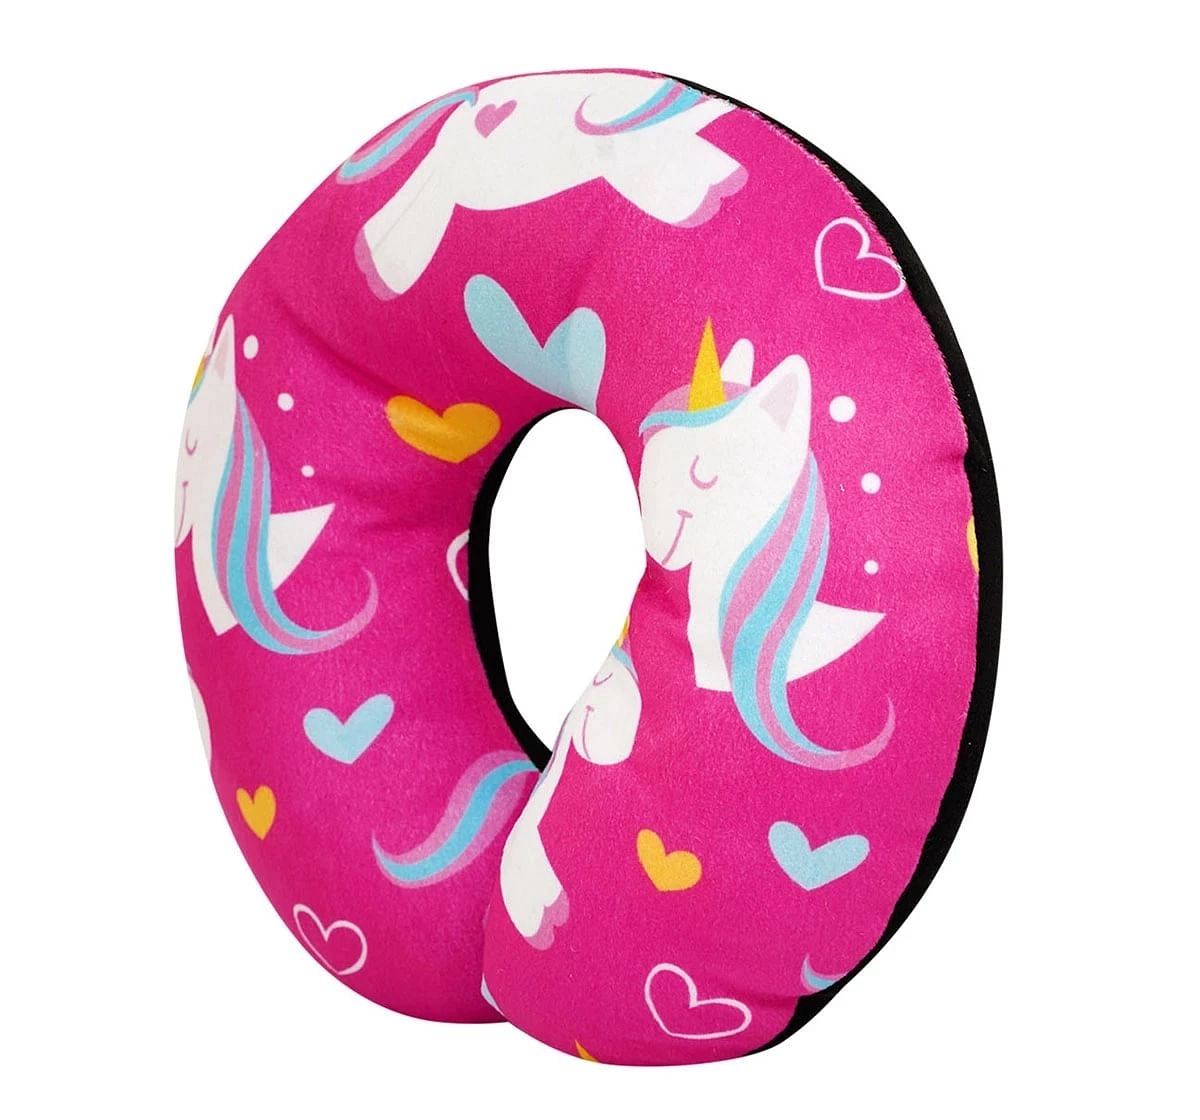 Luvley Ultrasoft Neck Pillow For Kids, Pink, 3Y+